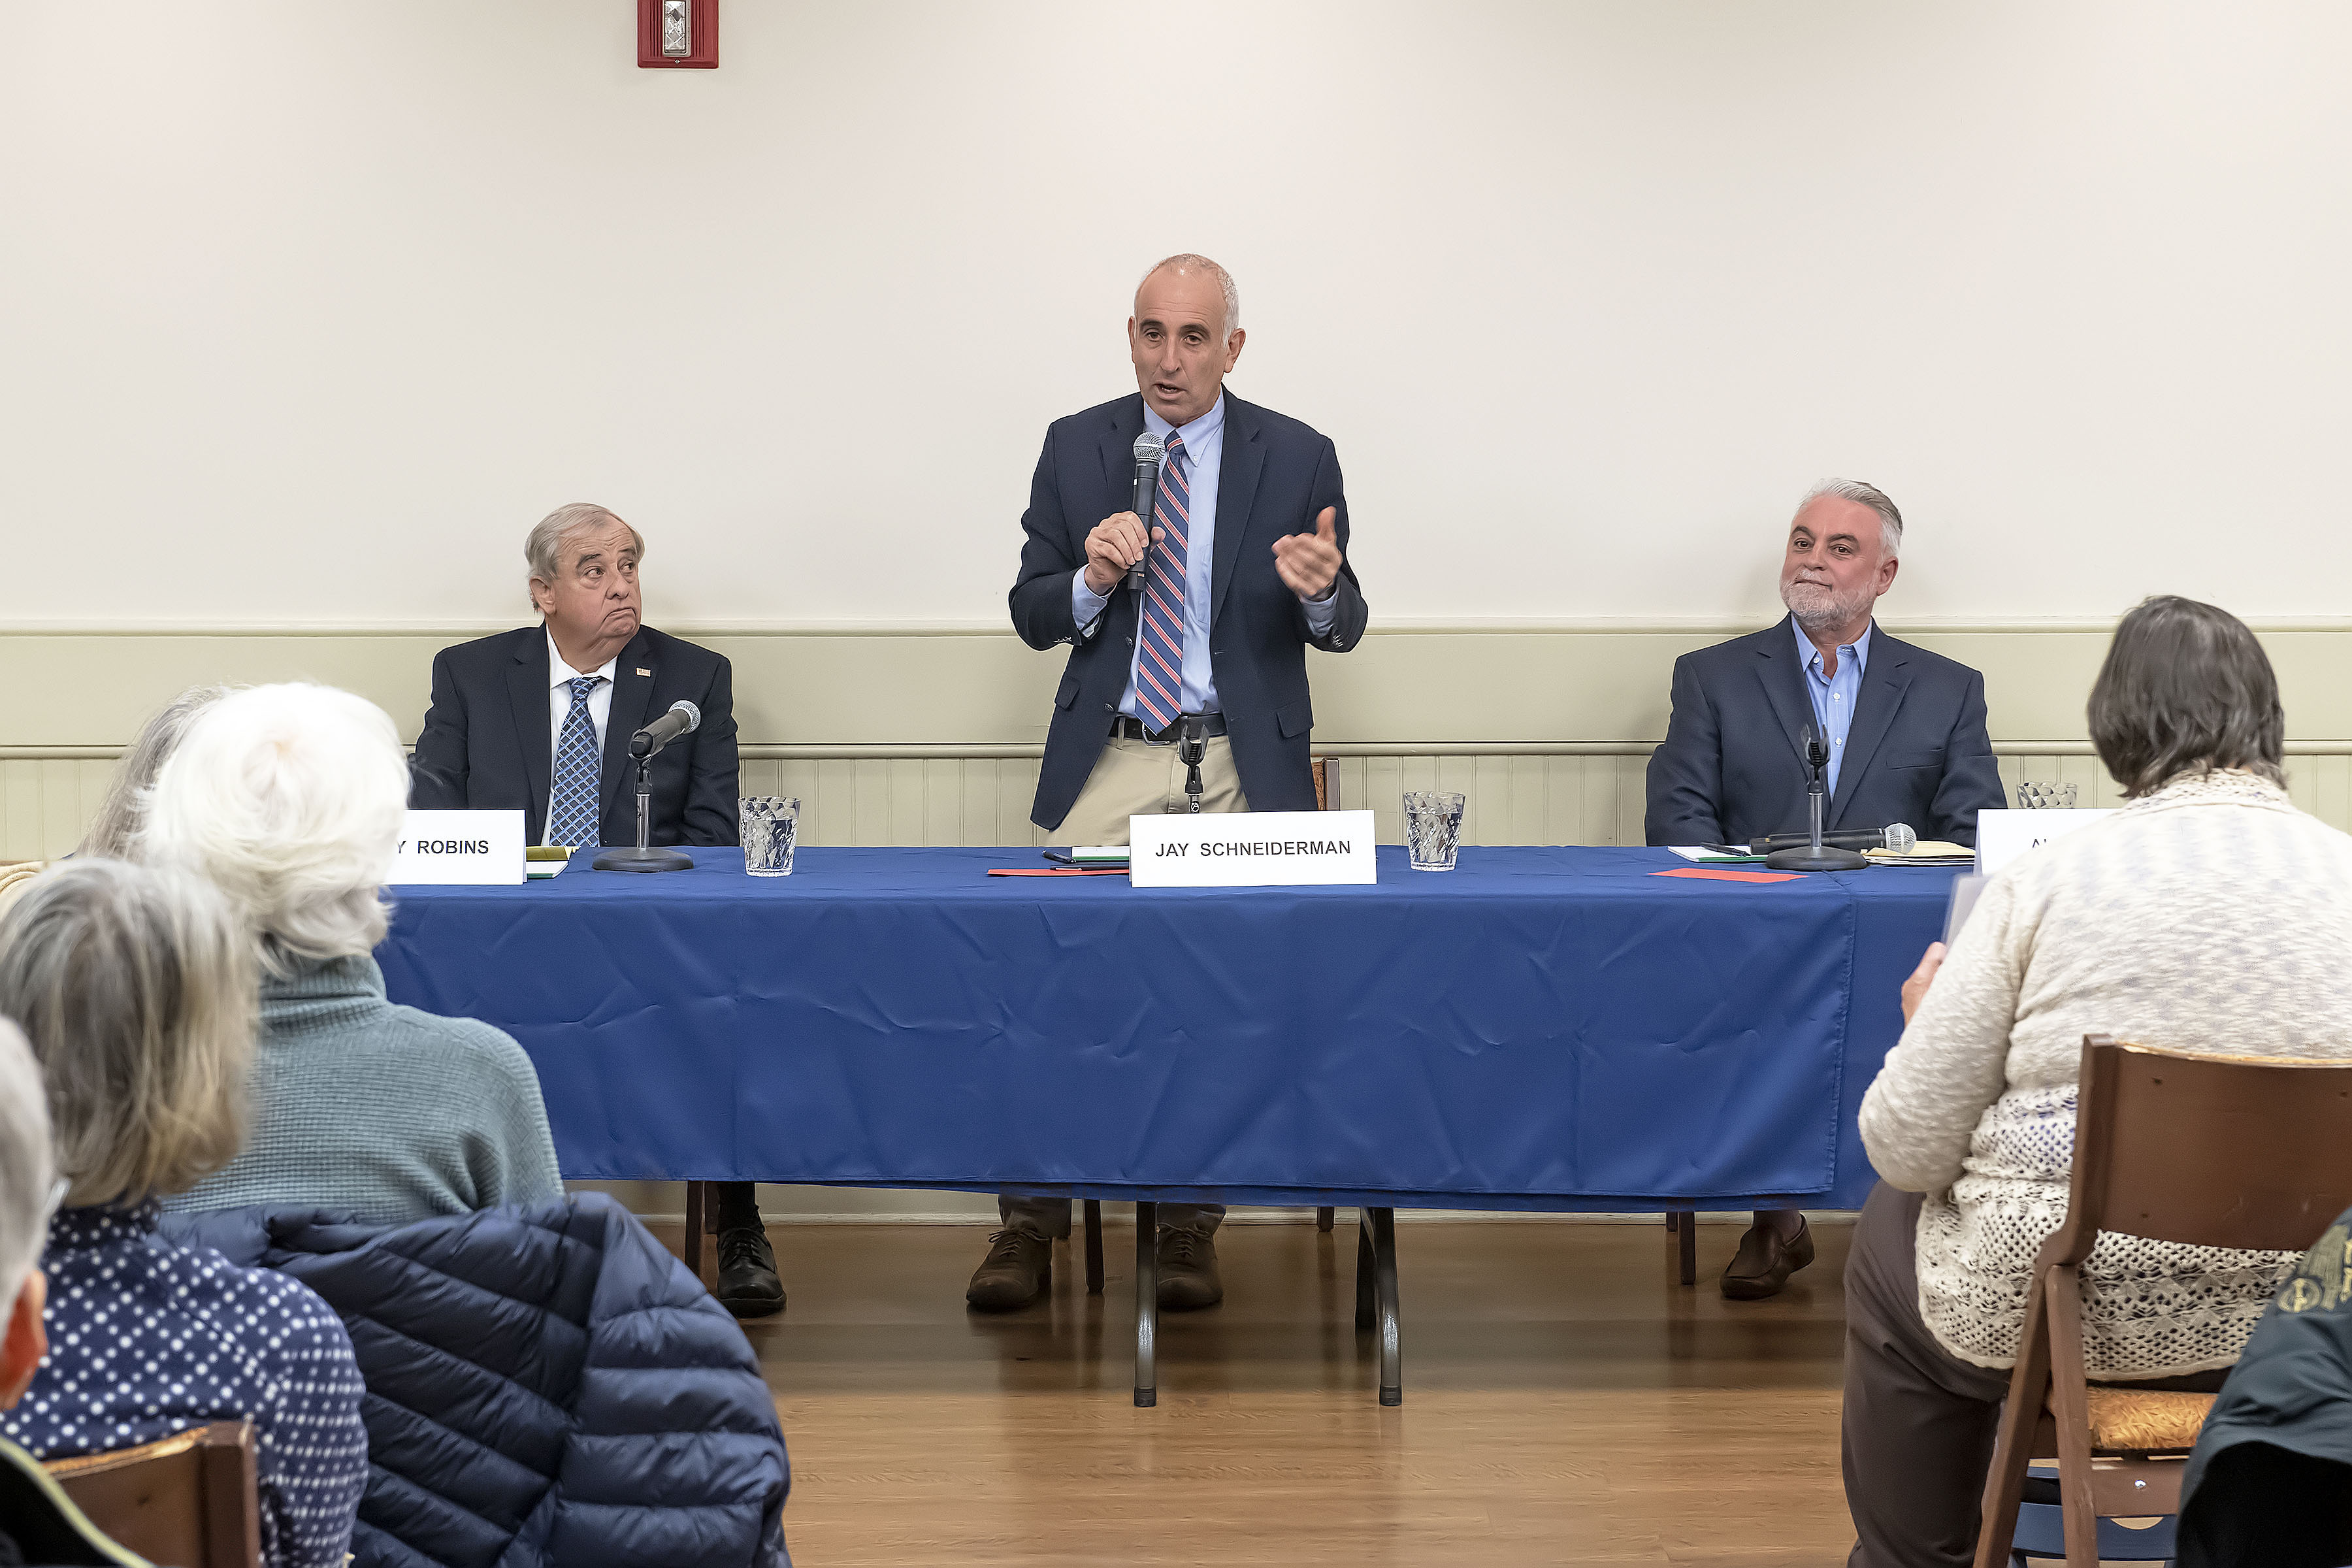 Southampton Town Supervisor Incumbent Candidate Jay Schneiderman speaks as candidates Gregory Robins and Alex Gregor look on during a Meet the Candidates Night sponsored by the League of Women Voters at the Rogers Memorial Library in Southampton on Thursday, October 17.     MICHAEL HELLER